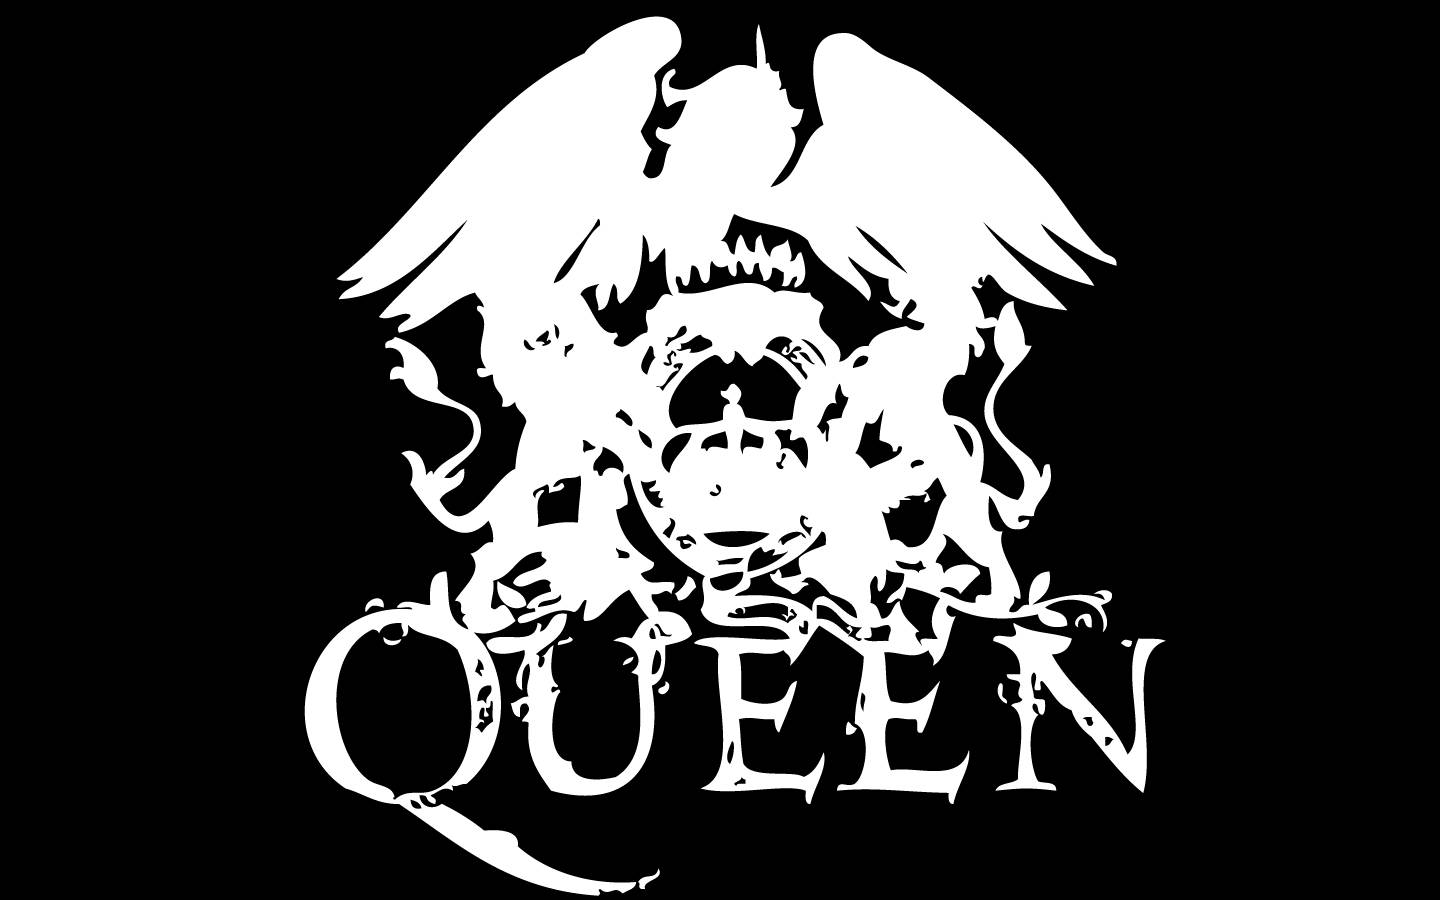 Black And White Queen Crest Wallpaper